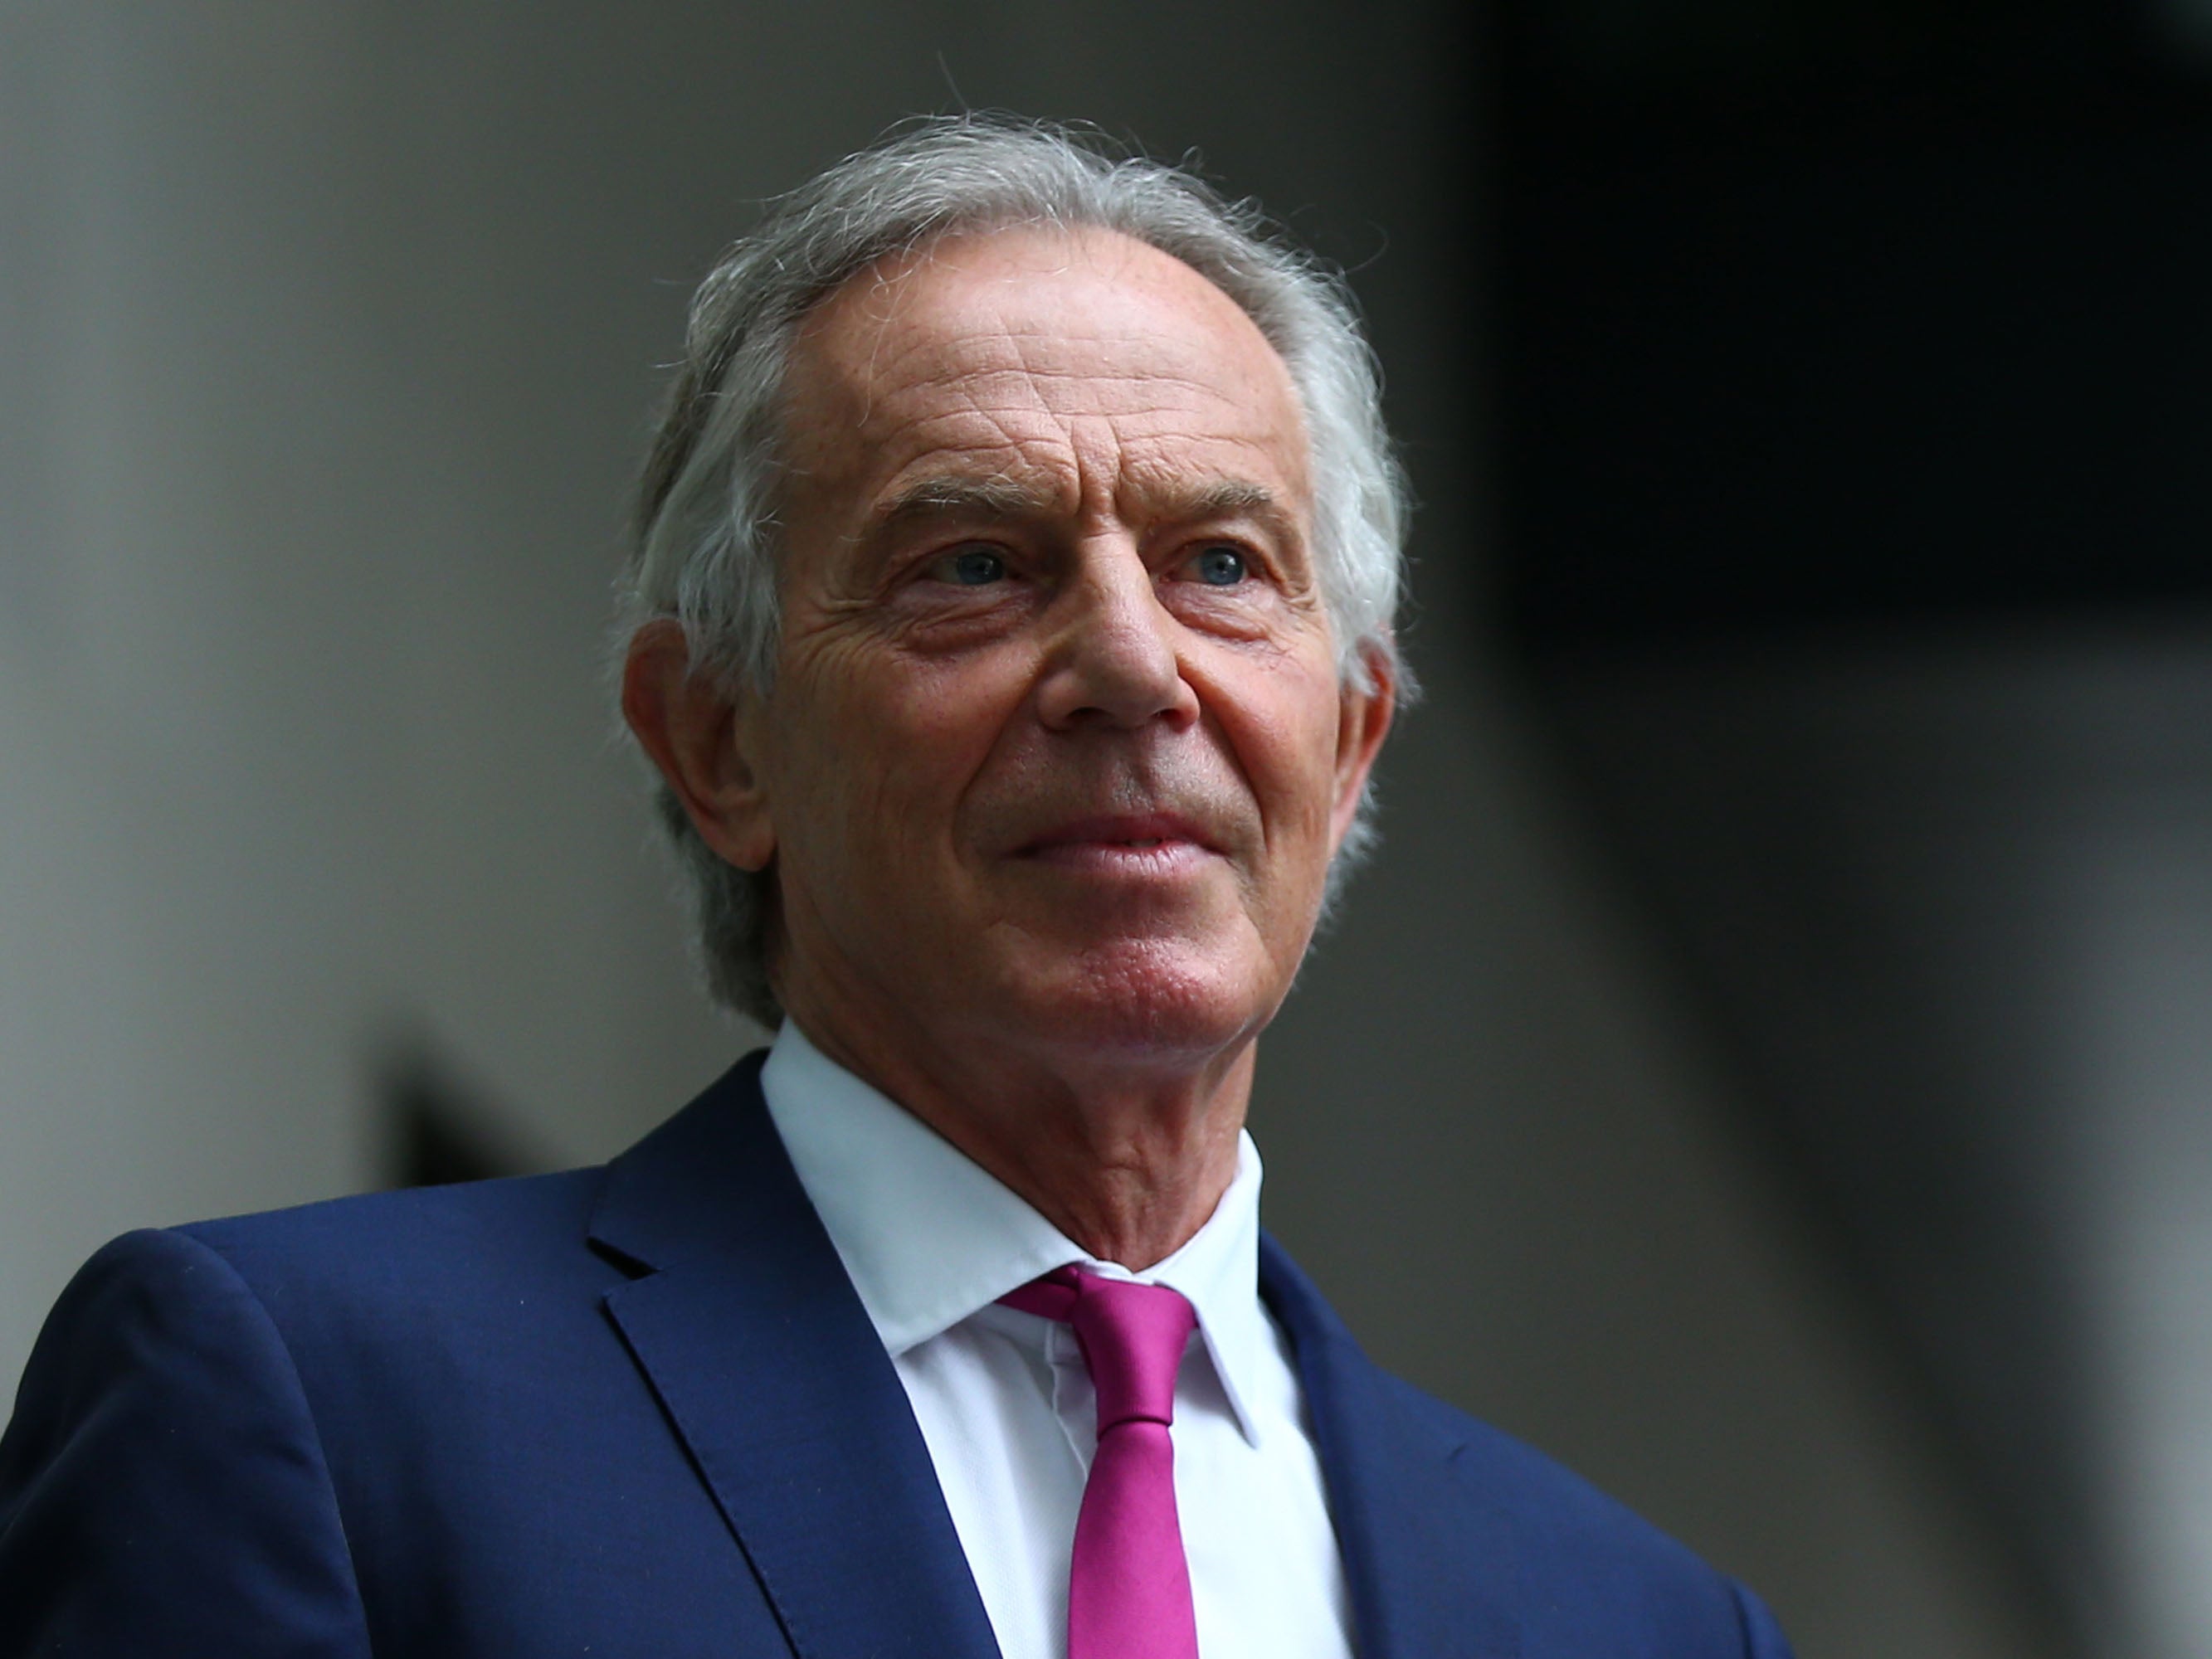 Former prime minister Tony Blair is to be handed a knighthood alongside England’s chief medical officer Professor Chris Whitty